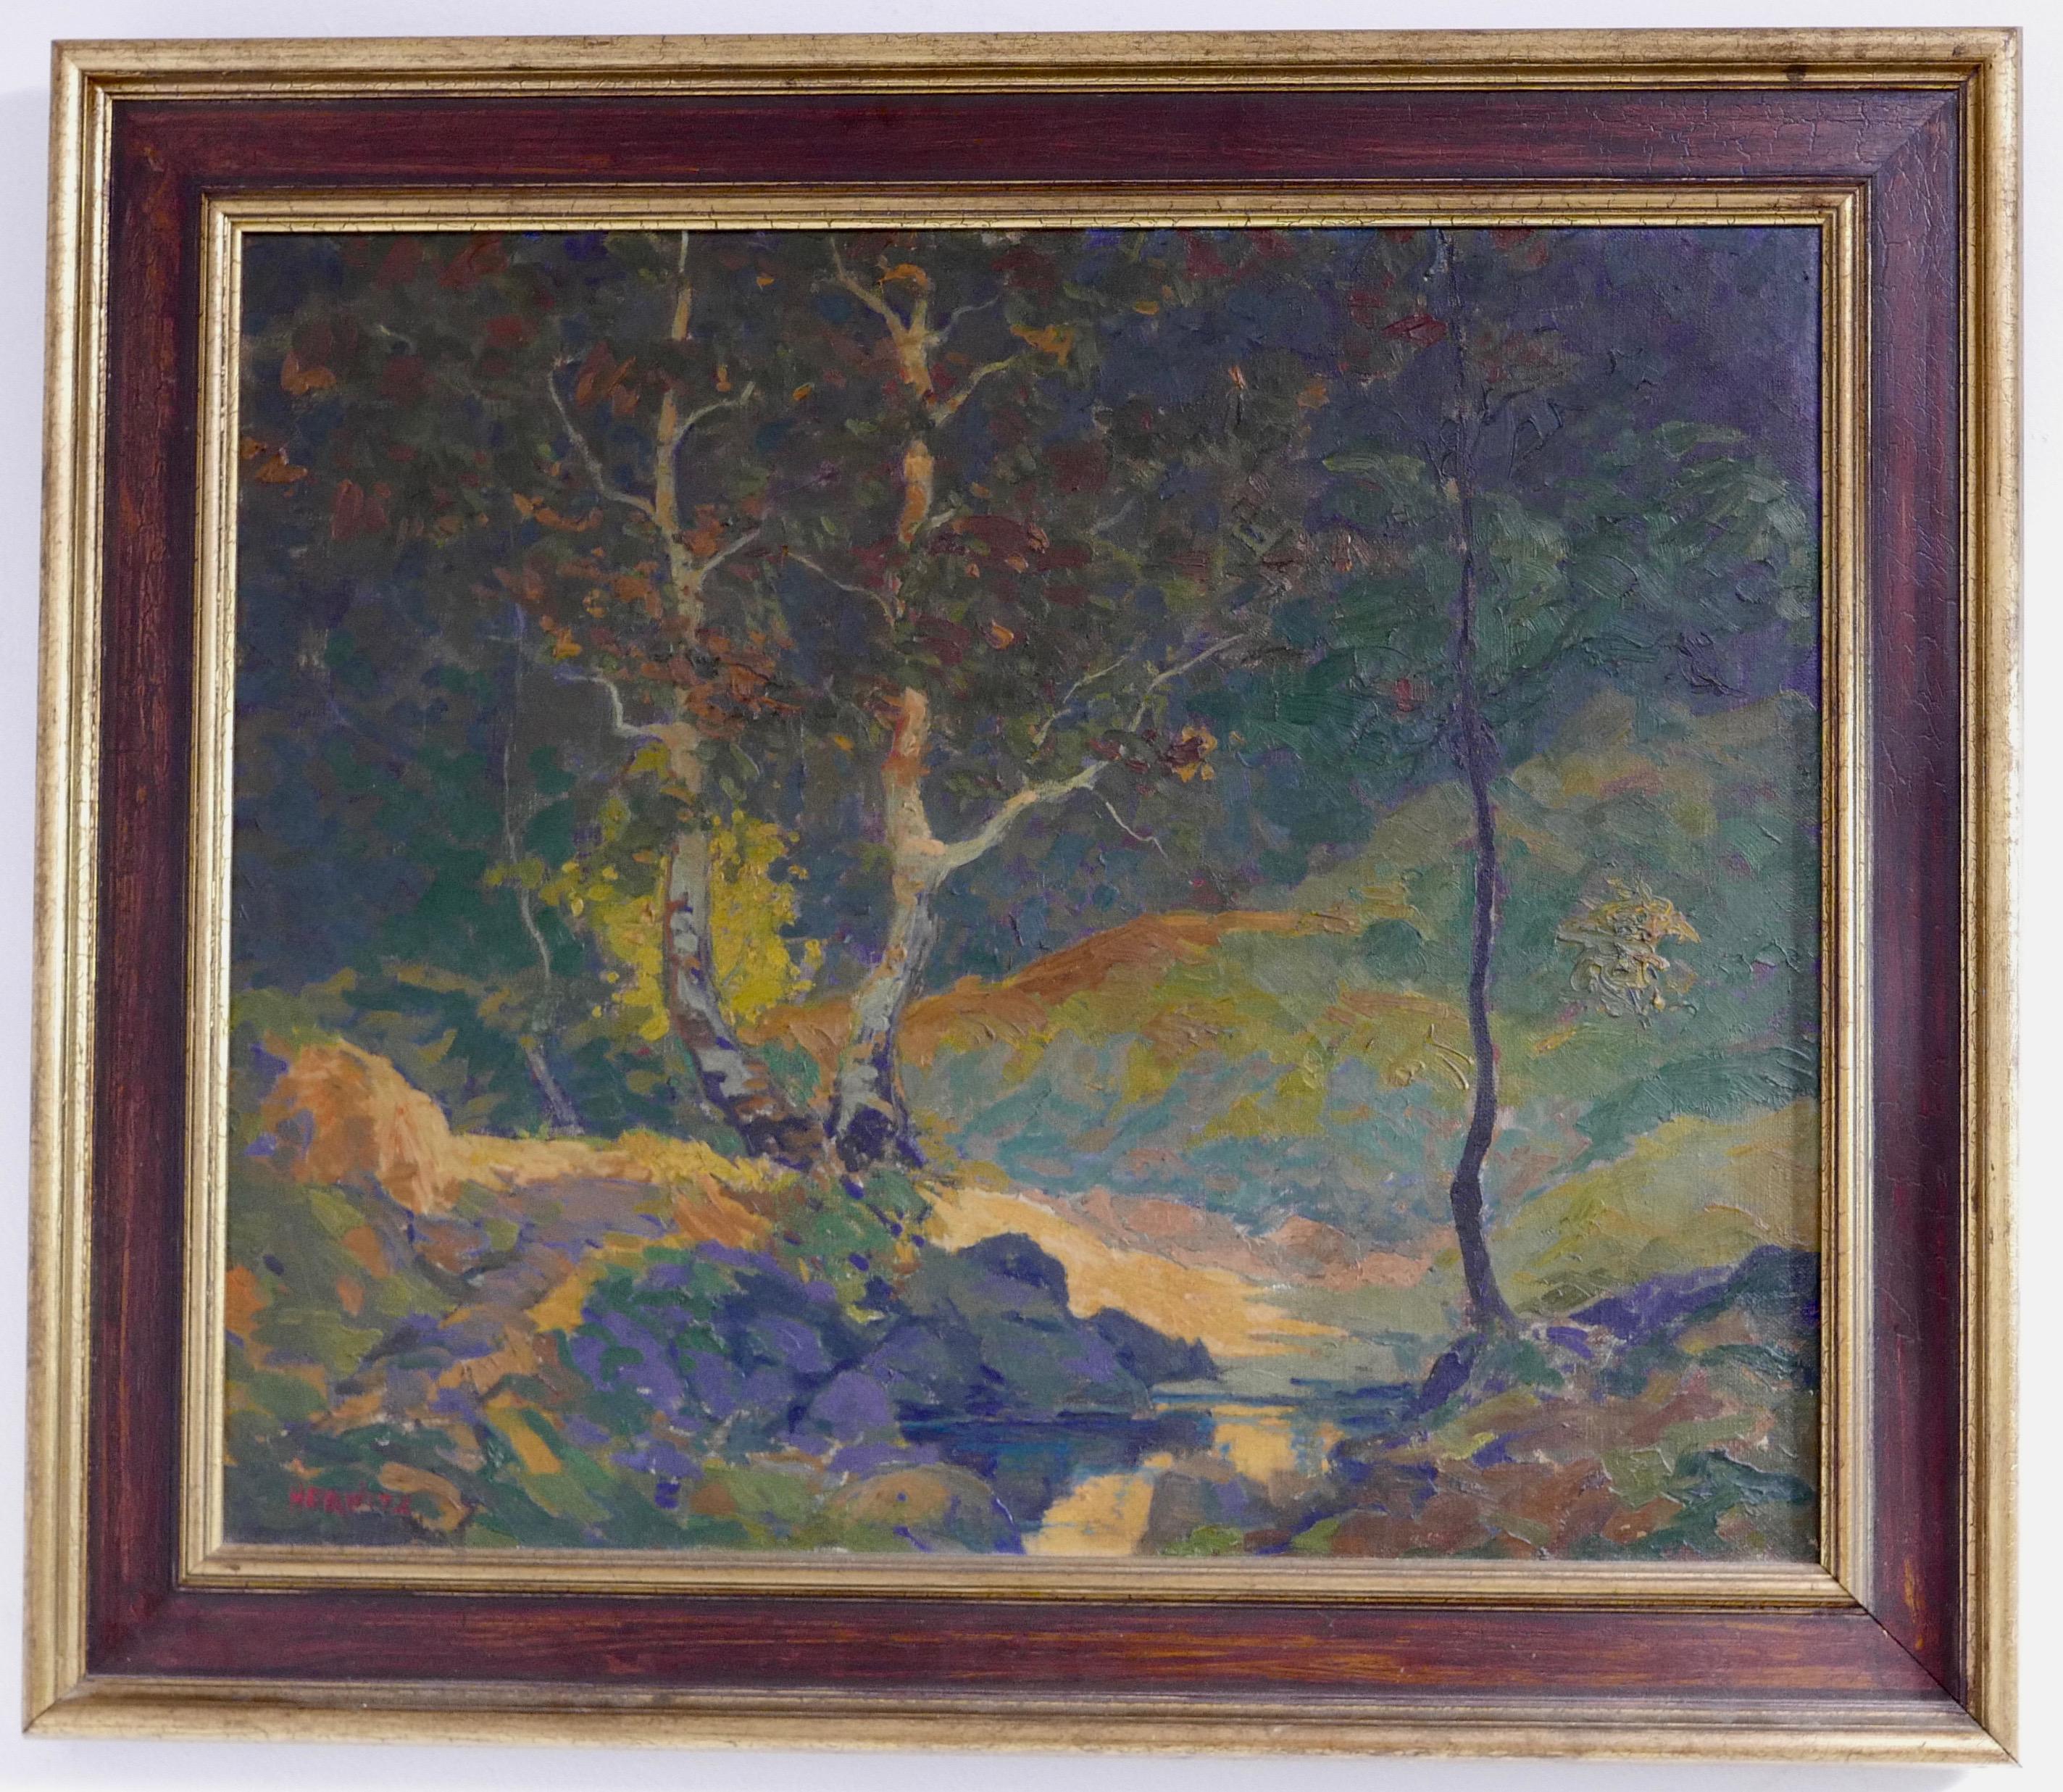 An impressionist inspired colorful oil on canvas landscape painting by California artist William N. Horwitz. Signed LL and dedicated to a friend from Bill Horwitz, 1924 - Banner, California 
in pencil on the back. 

William N. Horwitz
Born in